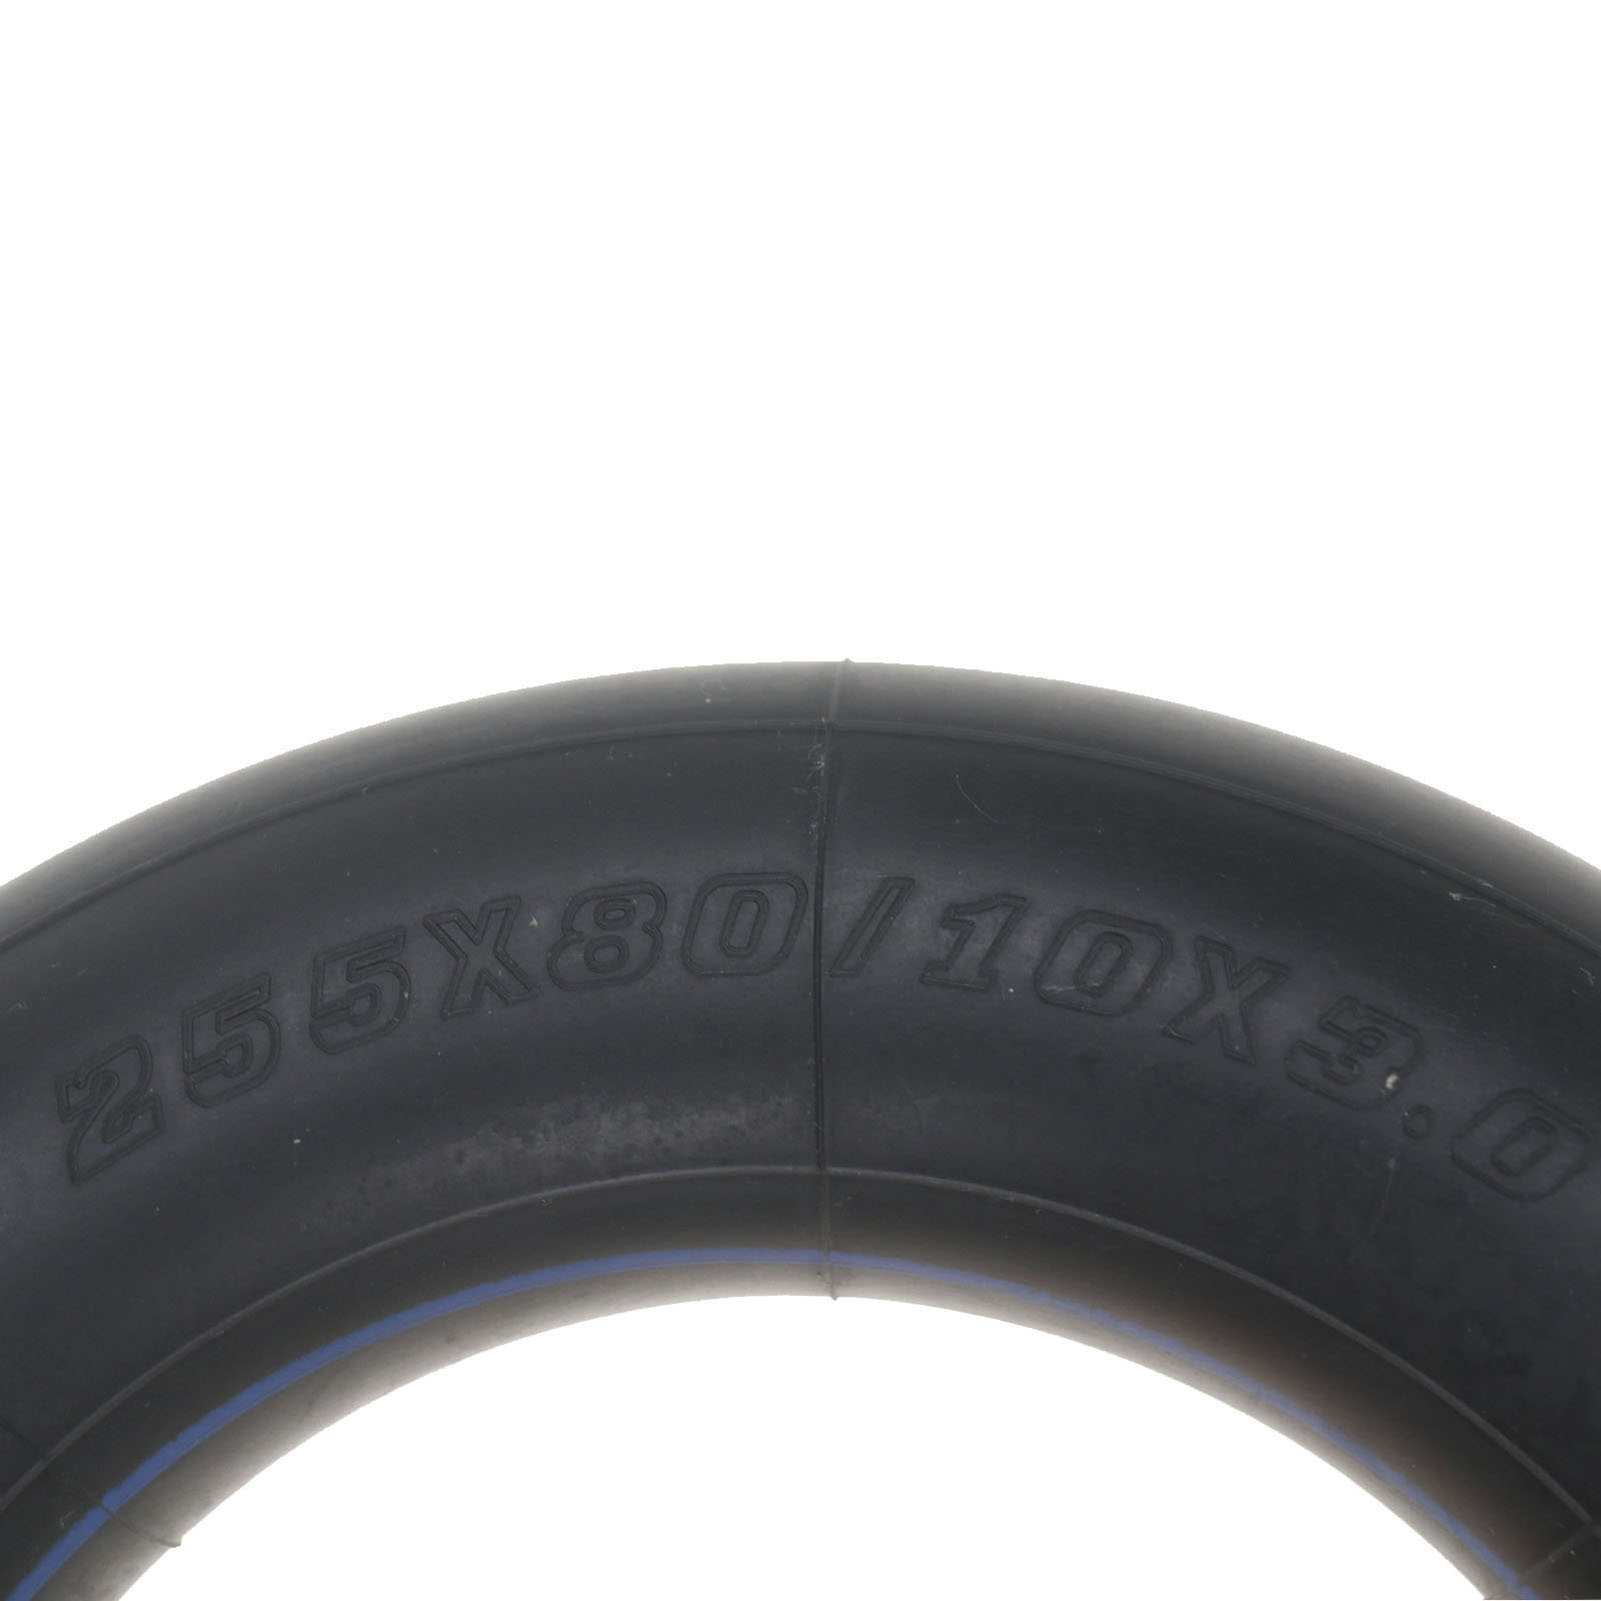 Thickened 10 * 3 Inner Tube Electric Scooter Tire 255 * 80 Inner Tube Suitable for 90/65-6.5 and 80/65-6.5 Tires 240mm Diameter Tire Electric Skateboard Inner Tube - image 3 of 5